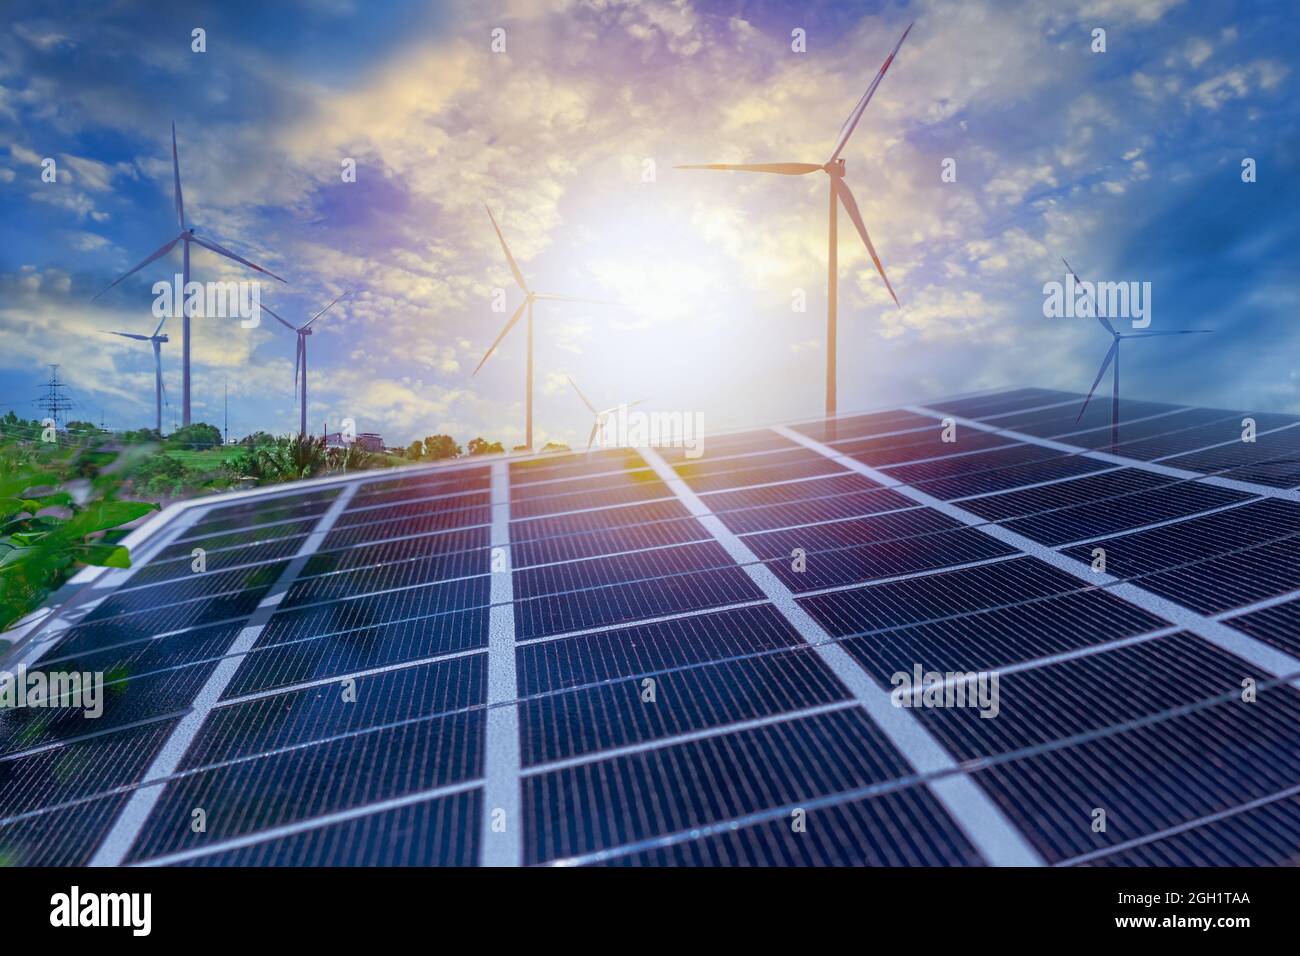 Solar panels and wind power stations. Renewable energy wind and solar generation. Defocused photo with soft focus. Stock Photo